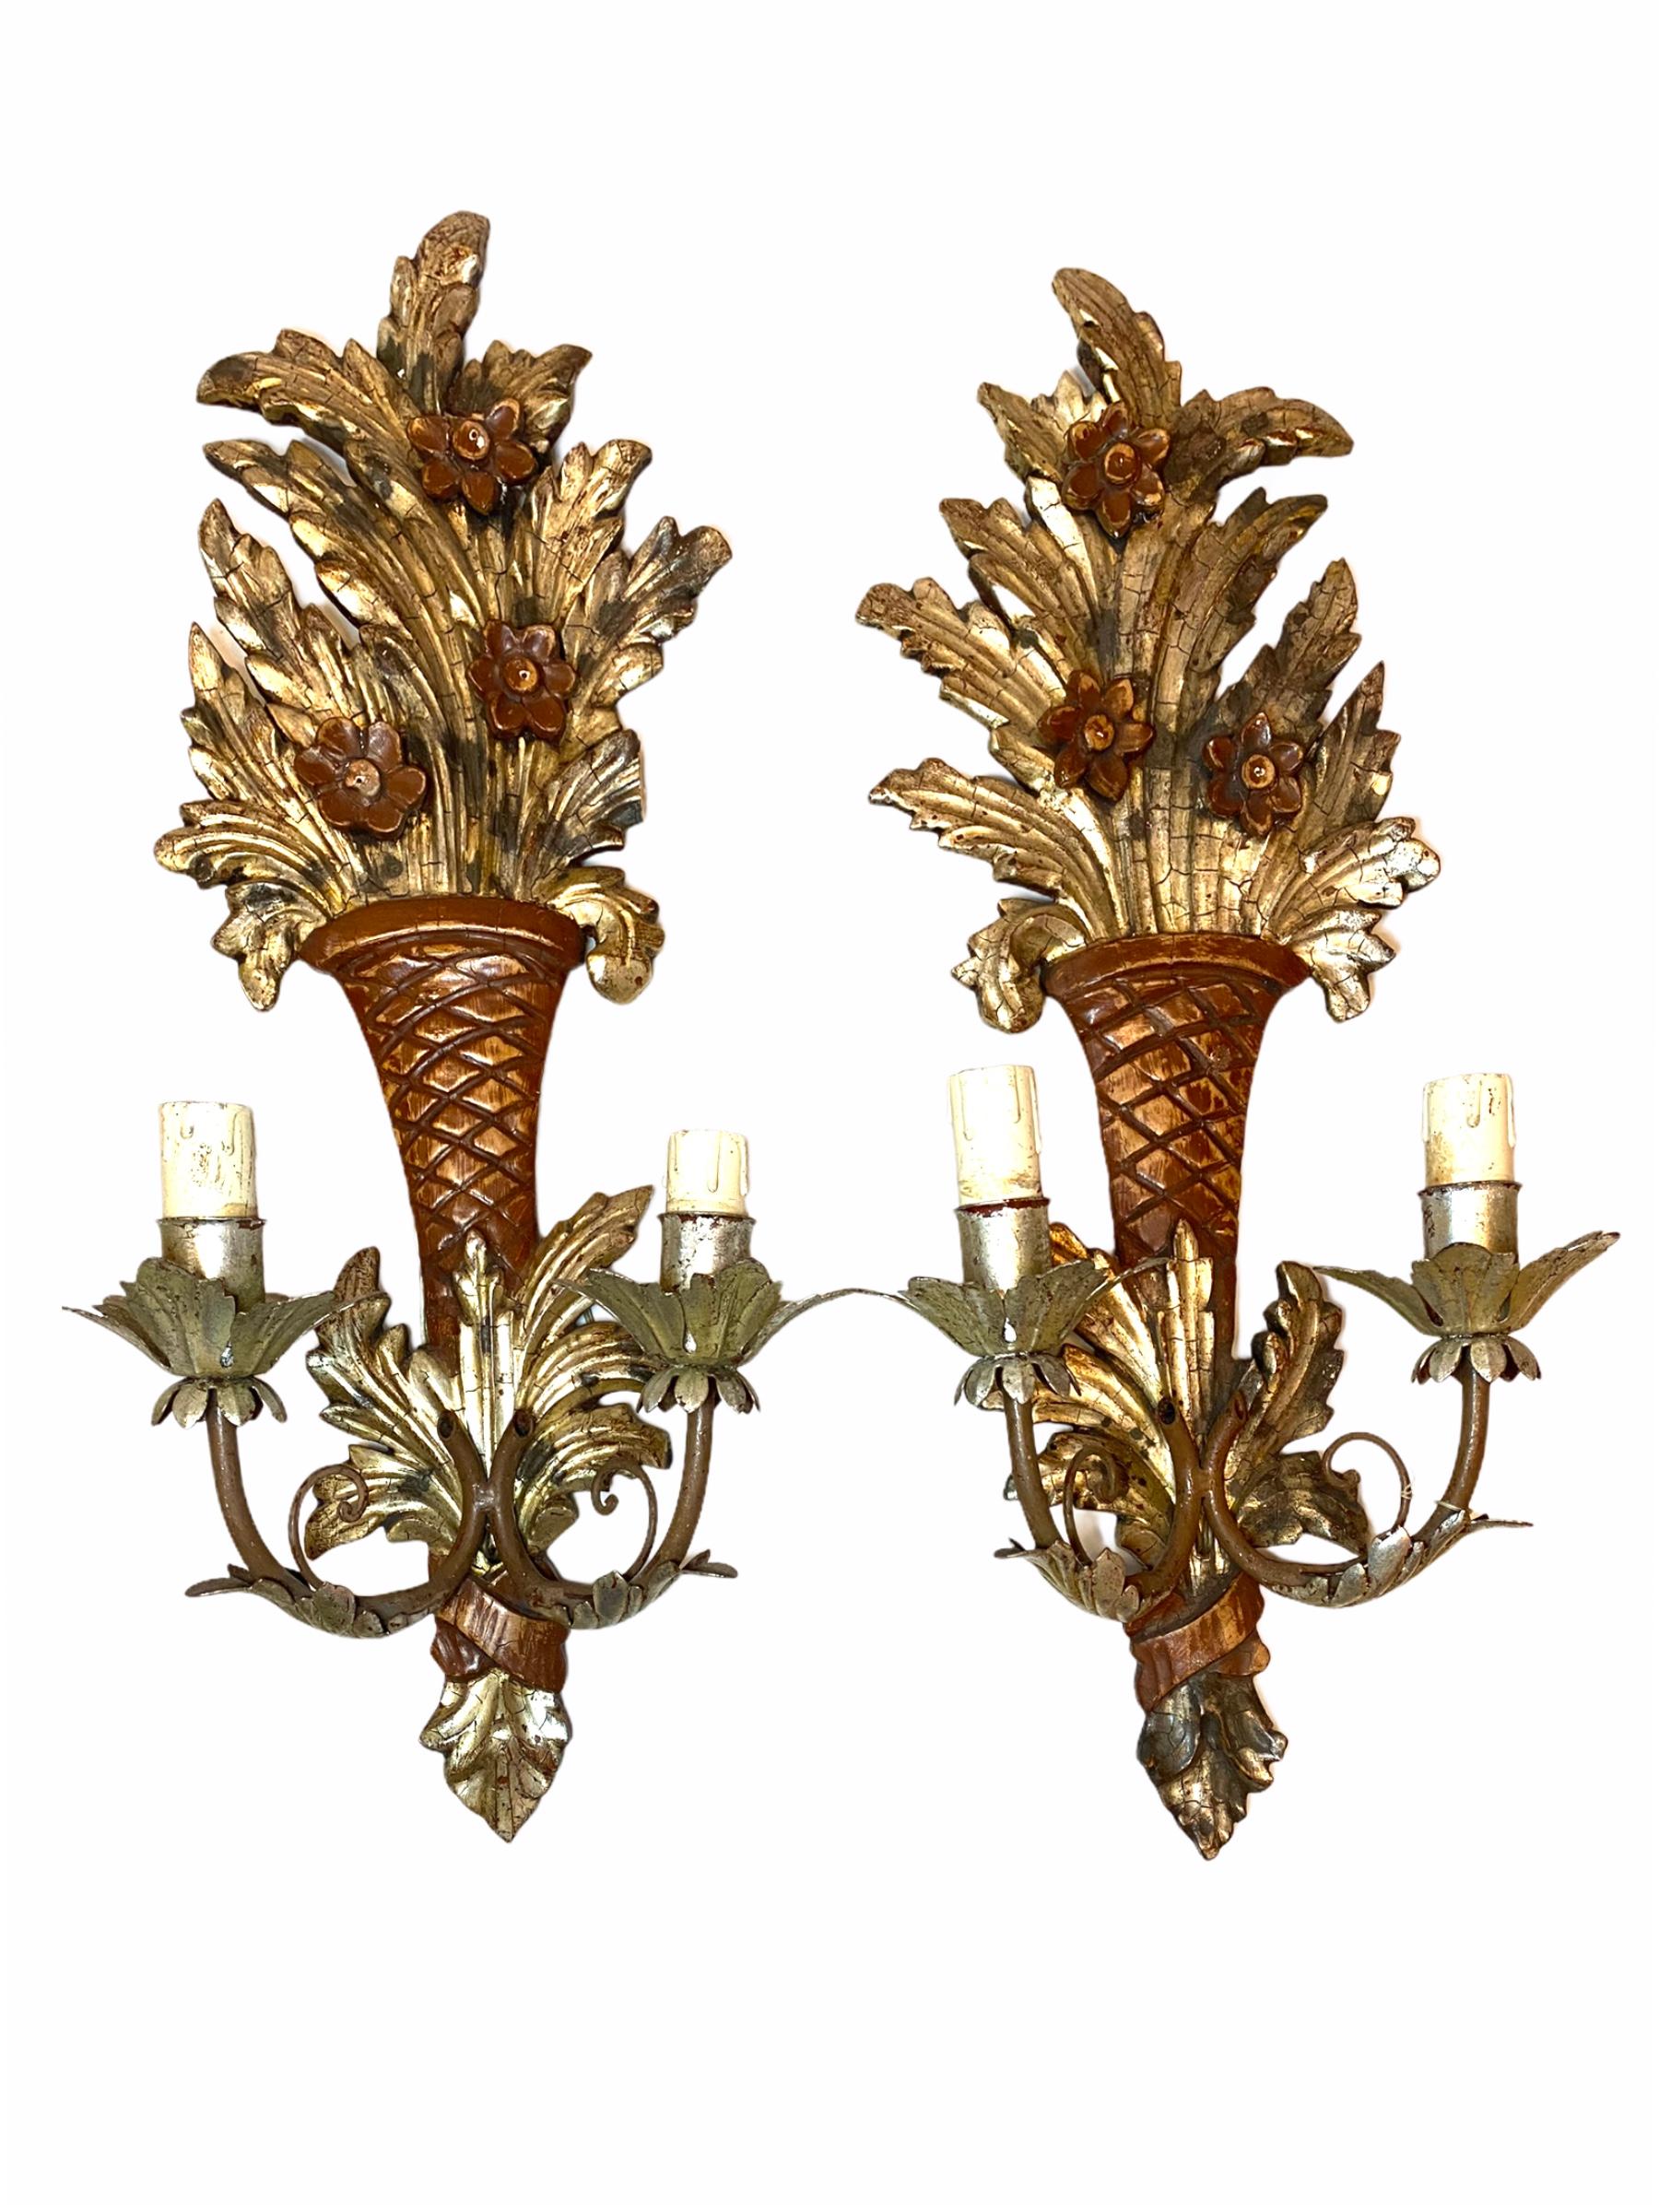 Hand-Carved Pair of Wooden Carved Tole Toleware Sconces with Gilt Flowers, Italy, 1920s For Sale